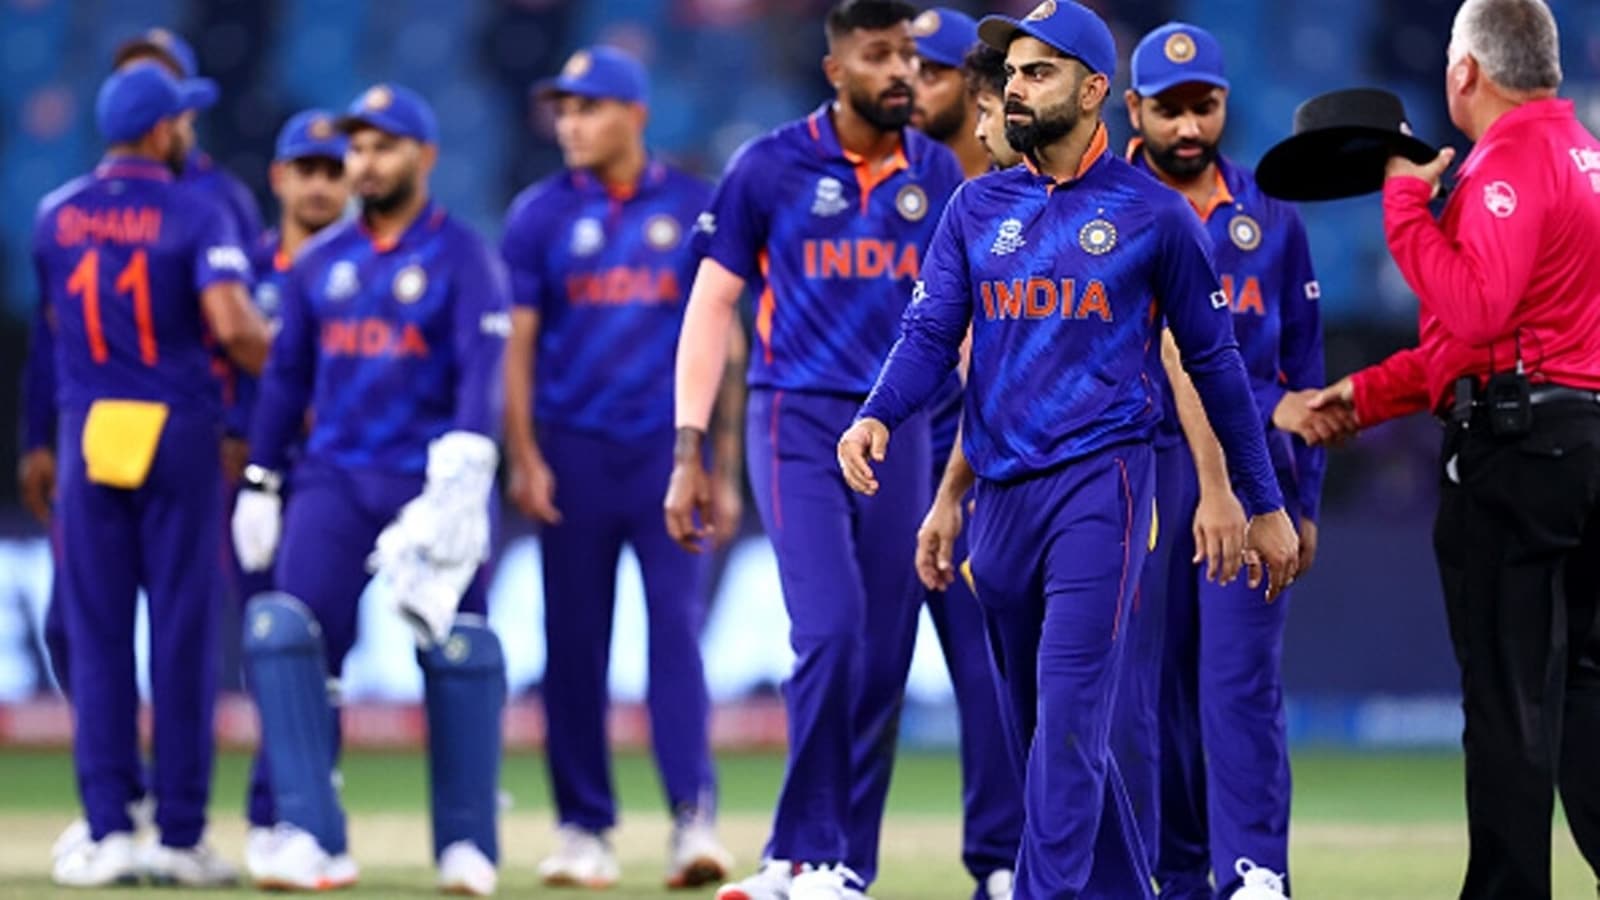 IND vs AFG, T20 World Cup 2021 Live Streaming When & where to watch